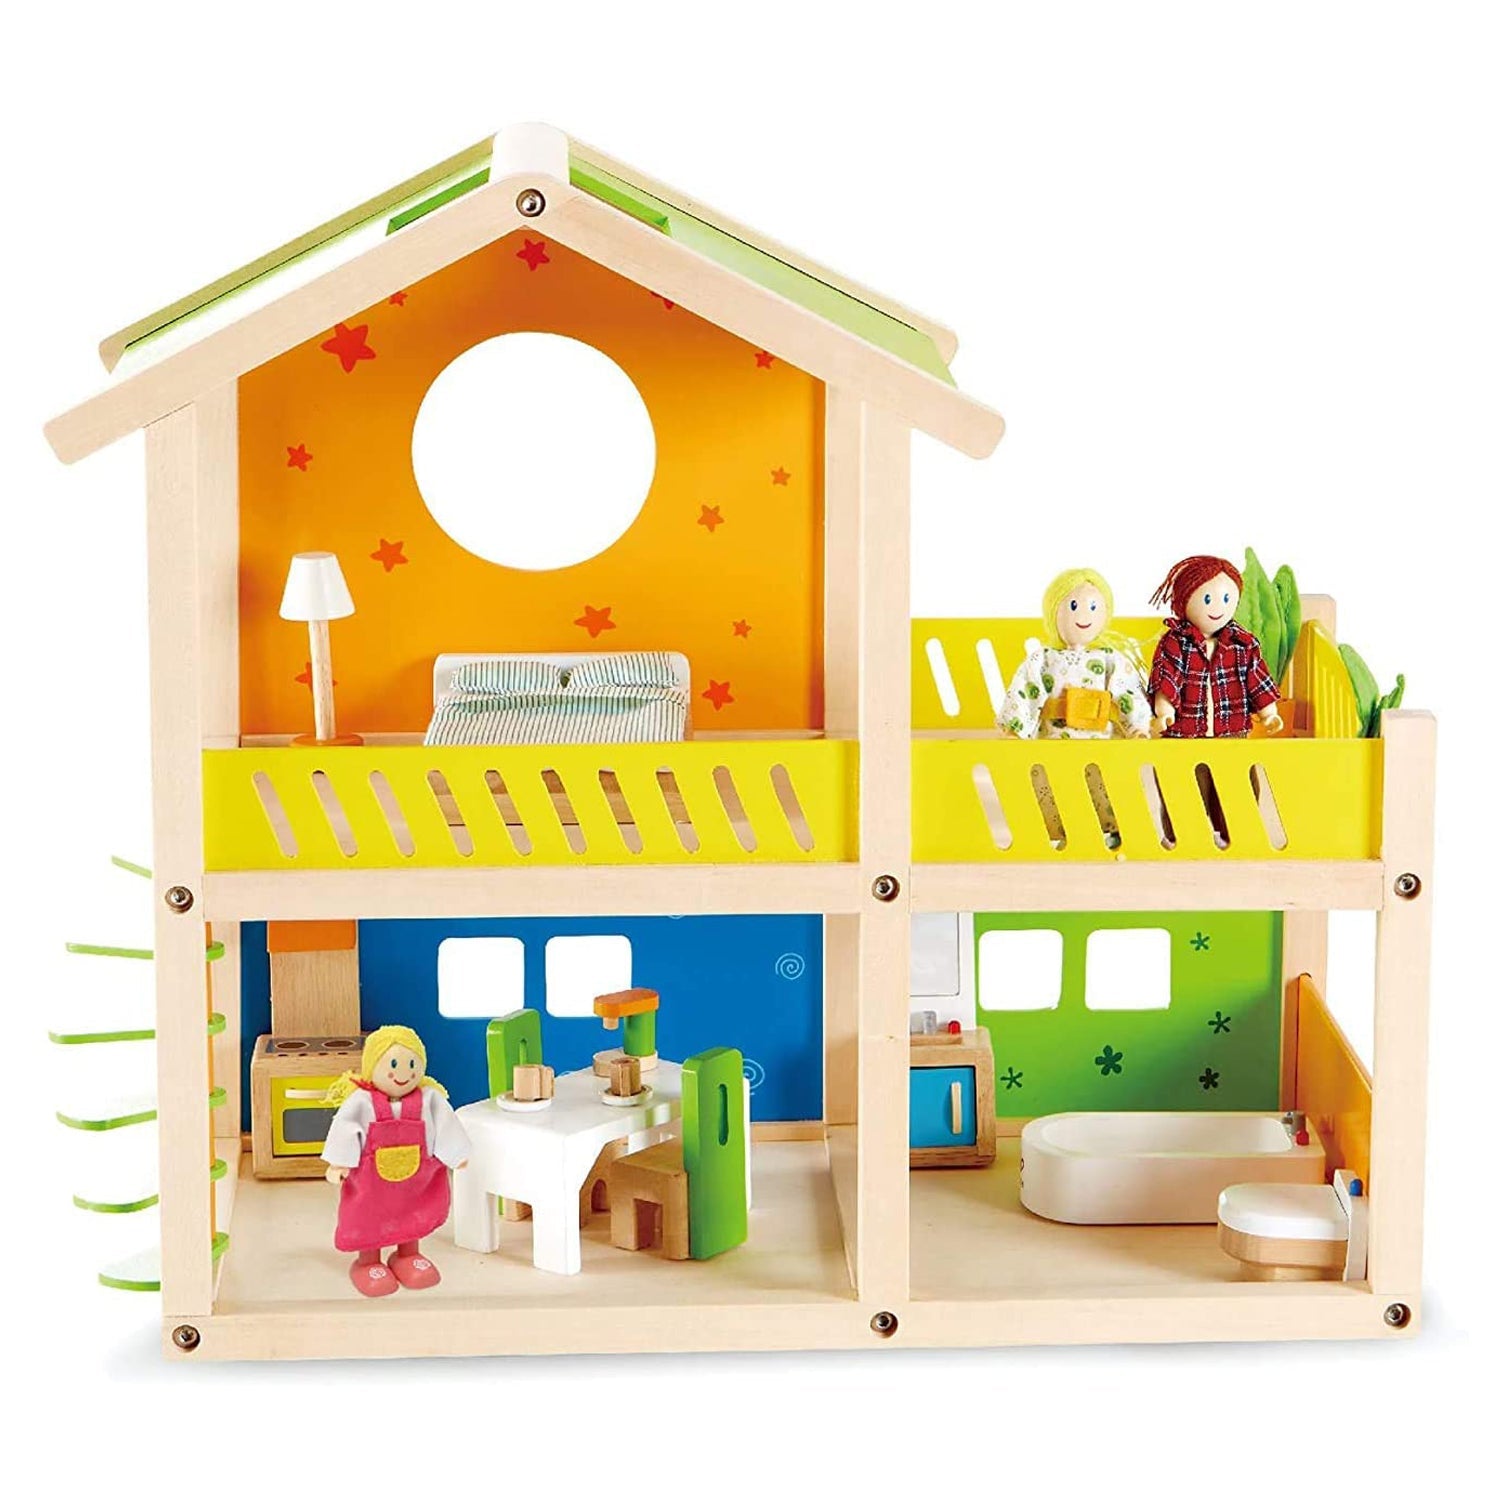 (OPEN BOX)  Hape Happy Villa Kids Wooden Doll House Set | 2 Story Dolls Villa with Furniture and Accessories